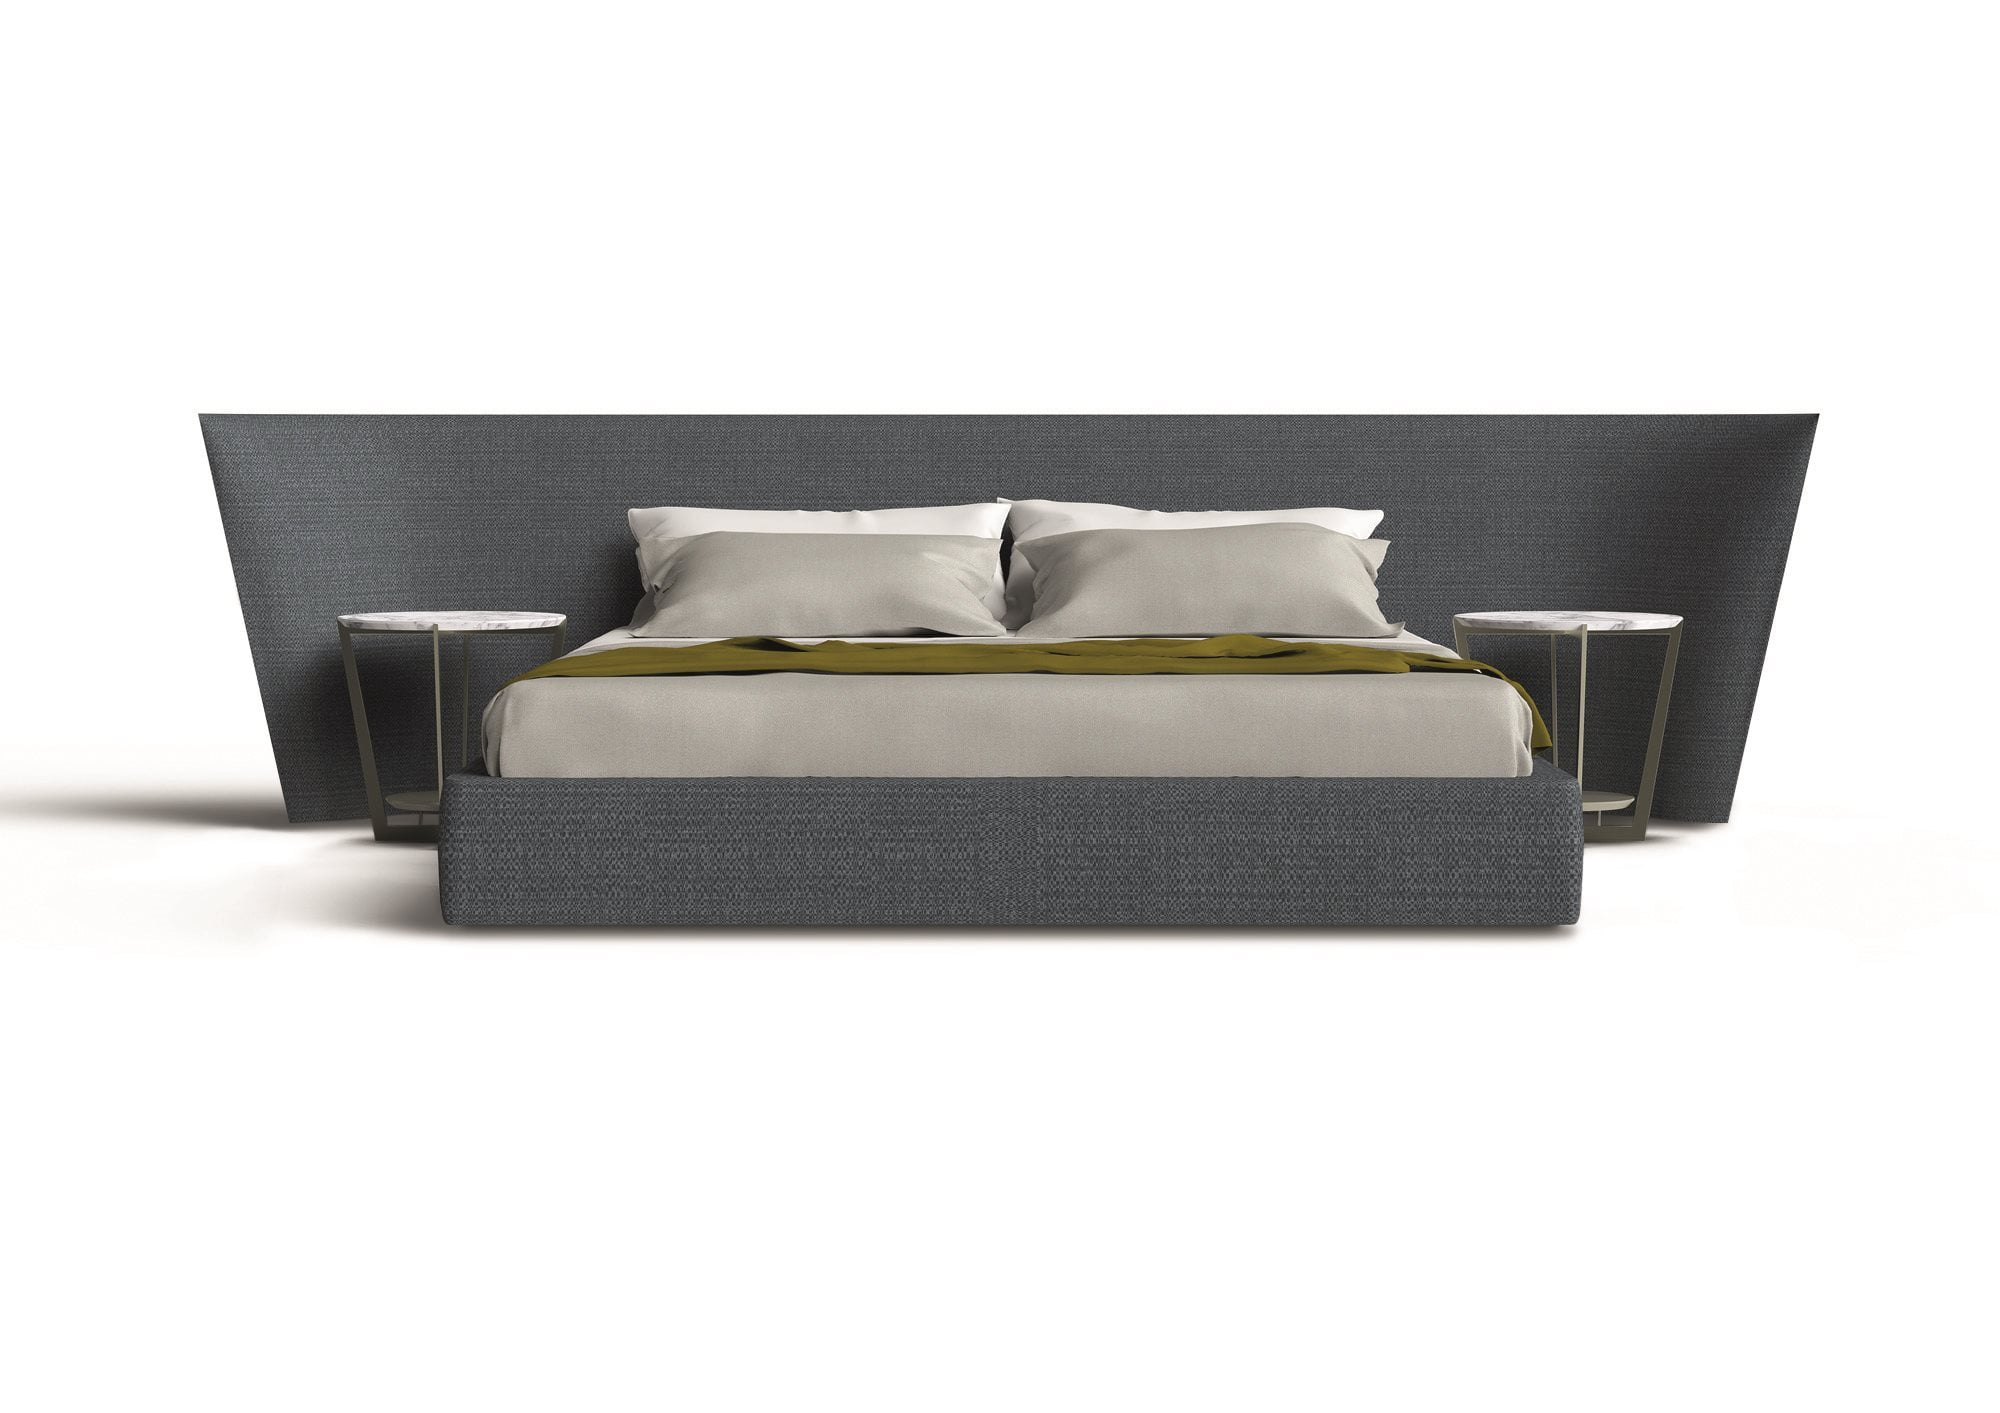 The Encompass Bed's simple style and timeless design make it an elegant addition to any bedroom decor